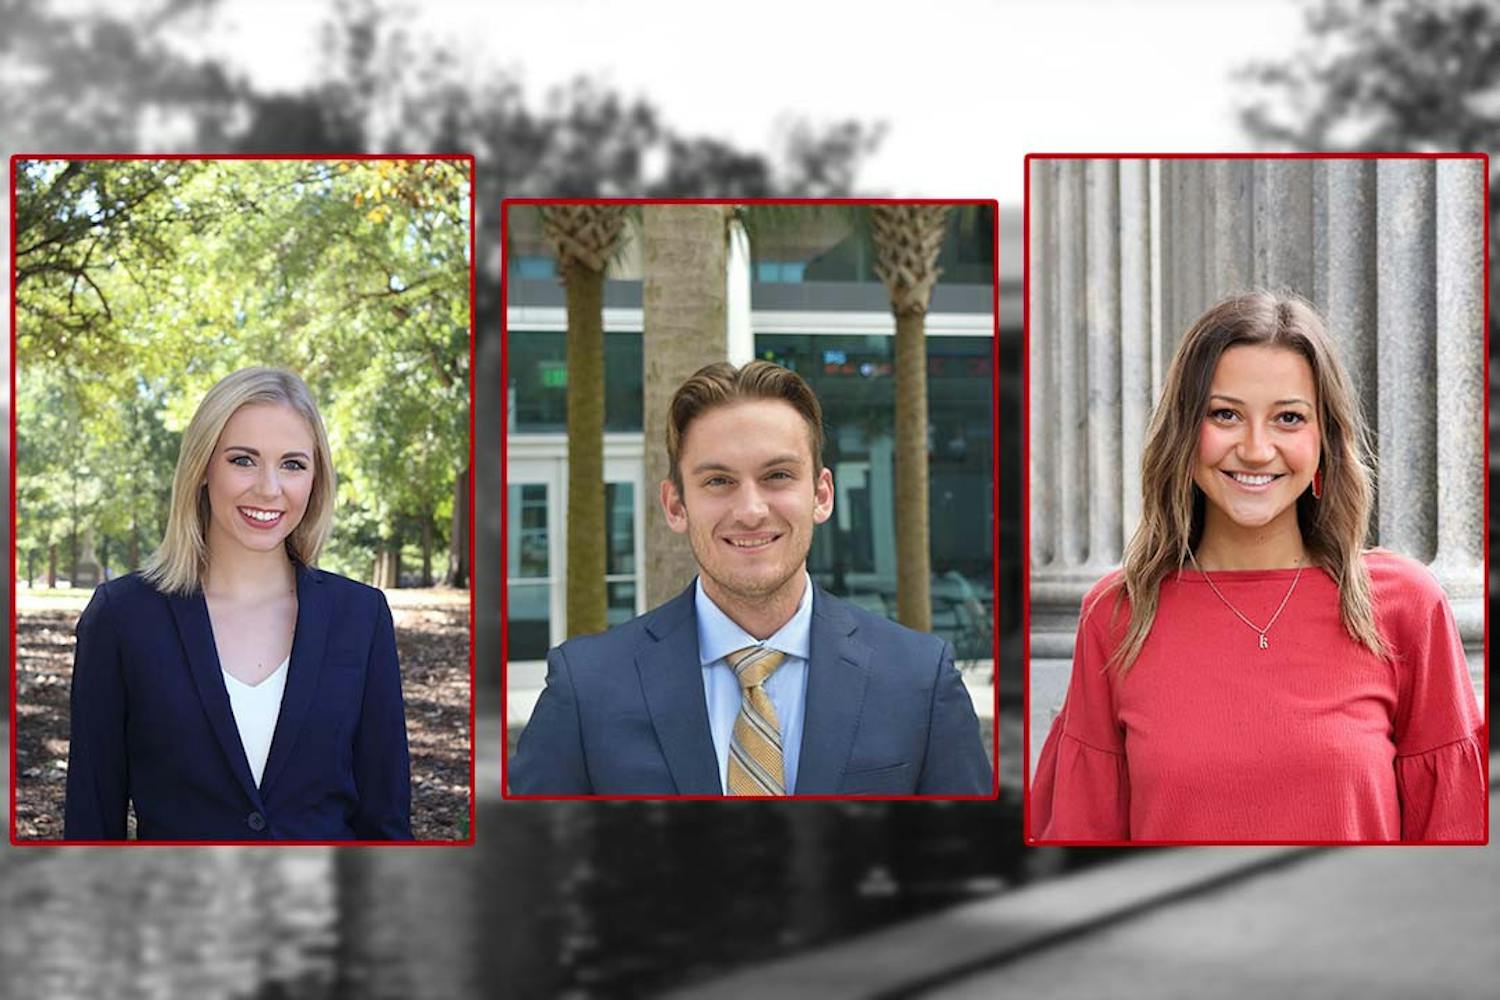 (Left to right) Former student body treasurer Laney Quickel, division secretary of finance Jason Zapranzy, and former student body treasurer Kate Turner. Voting to re-establish the Office of Student Body treasurer and create a student senate delegation for CarolinaLIFE has been postponed.